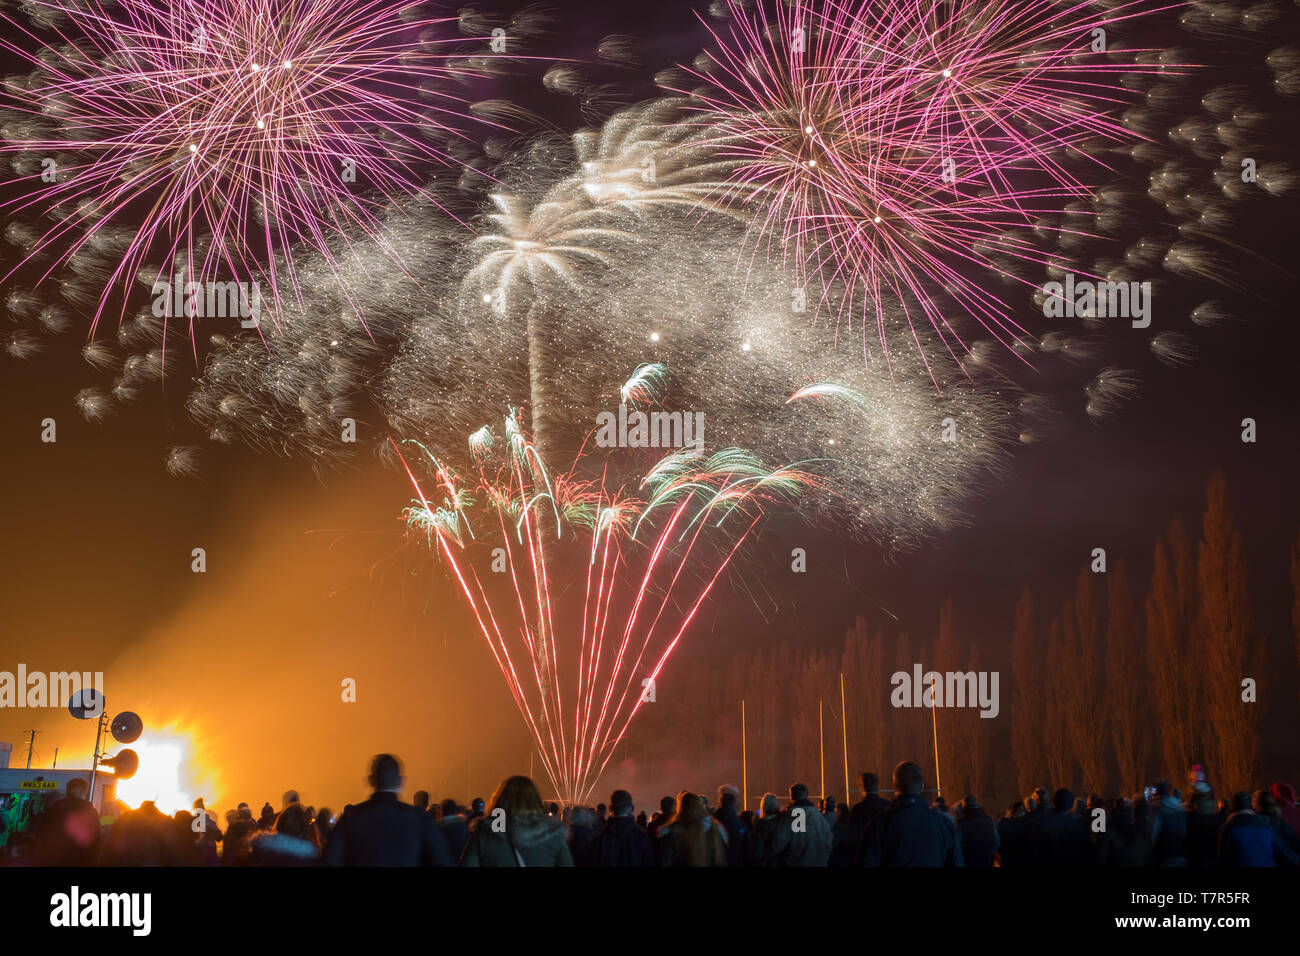 A public firework display in celebration of bonfire night at East Retford, Nottinghamshire, UK, taken from the back of the crowd Stock Photo